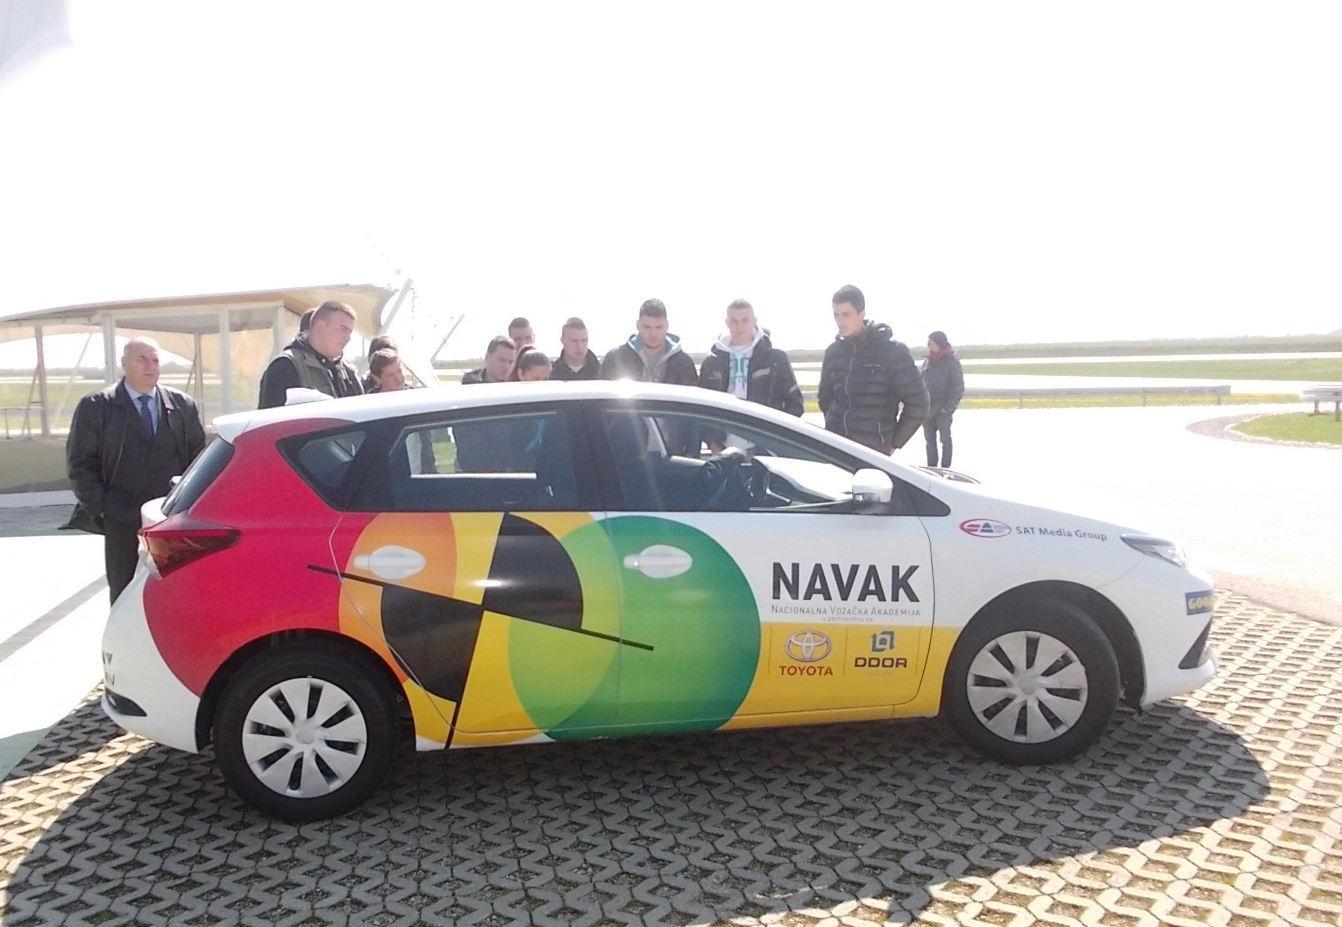 Young drivers in training at the National Driving Academy – NAVAK.